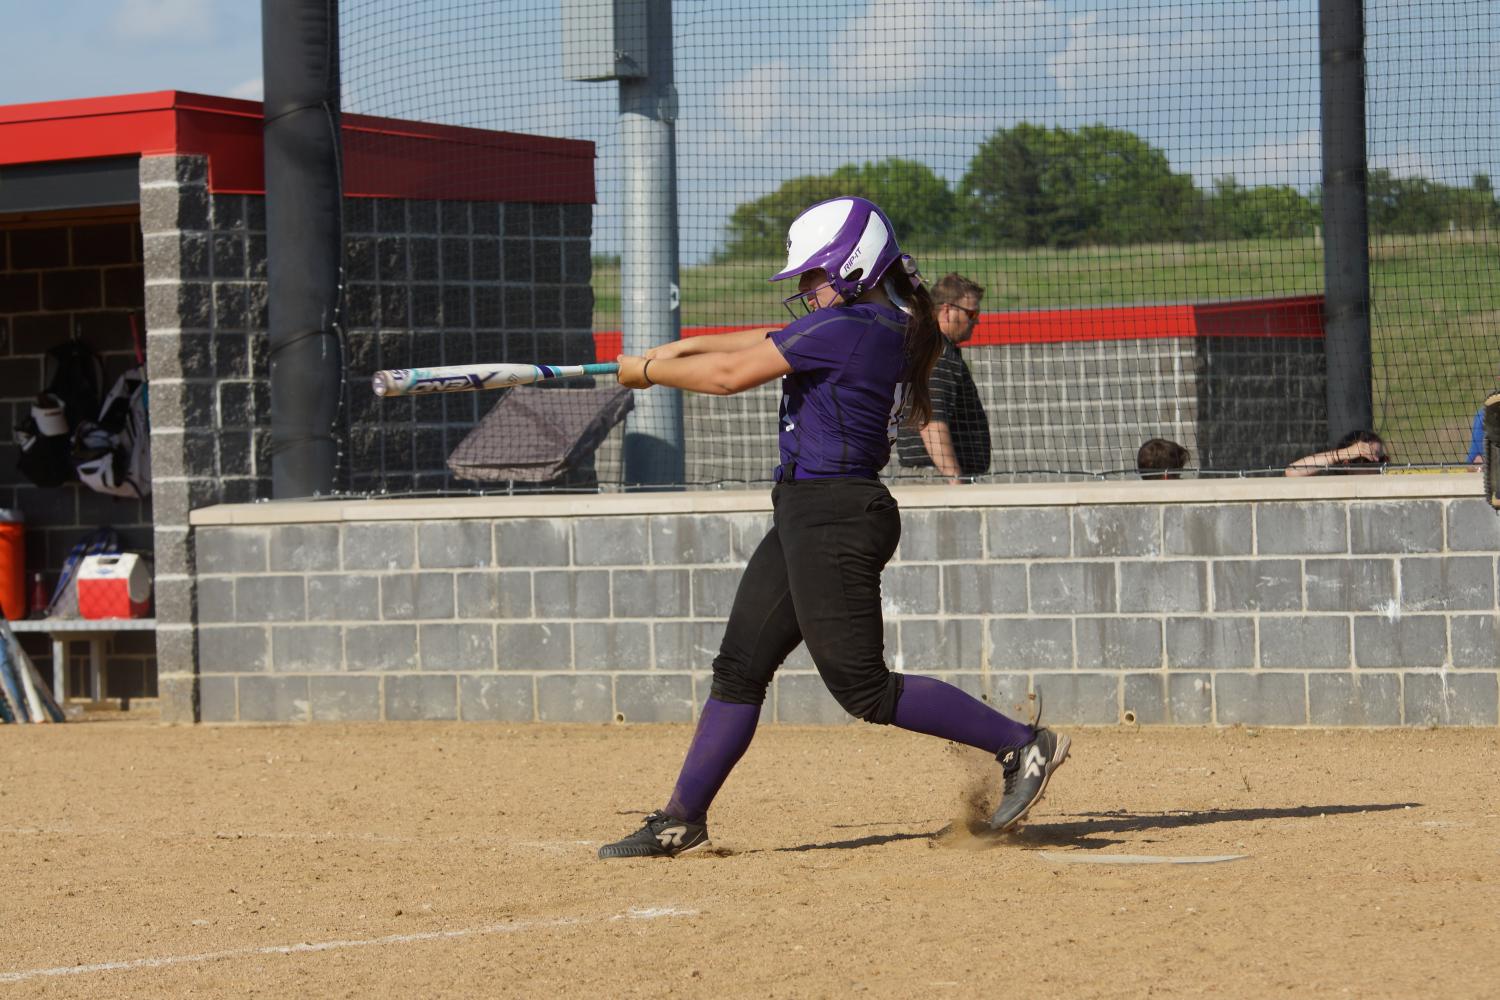 Lauren Pappert swings her bat hitting the ball into the right field gap getting a triple and scoring two run to help the pirates win their game. 